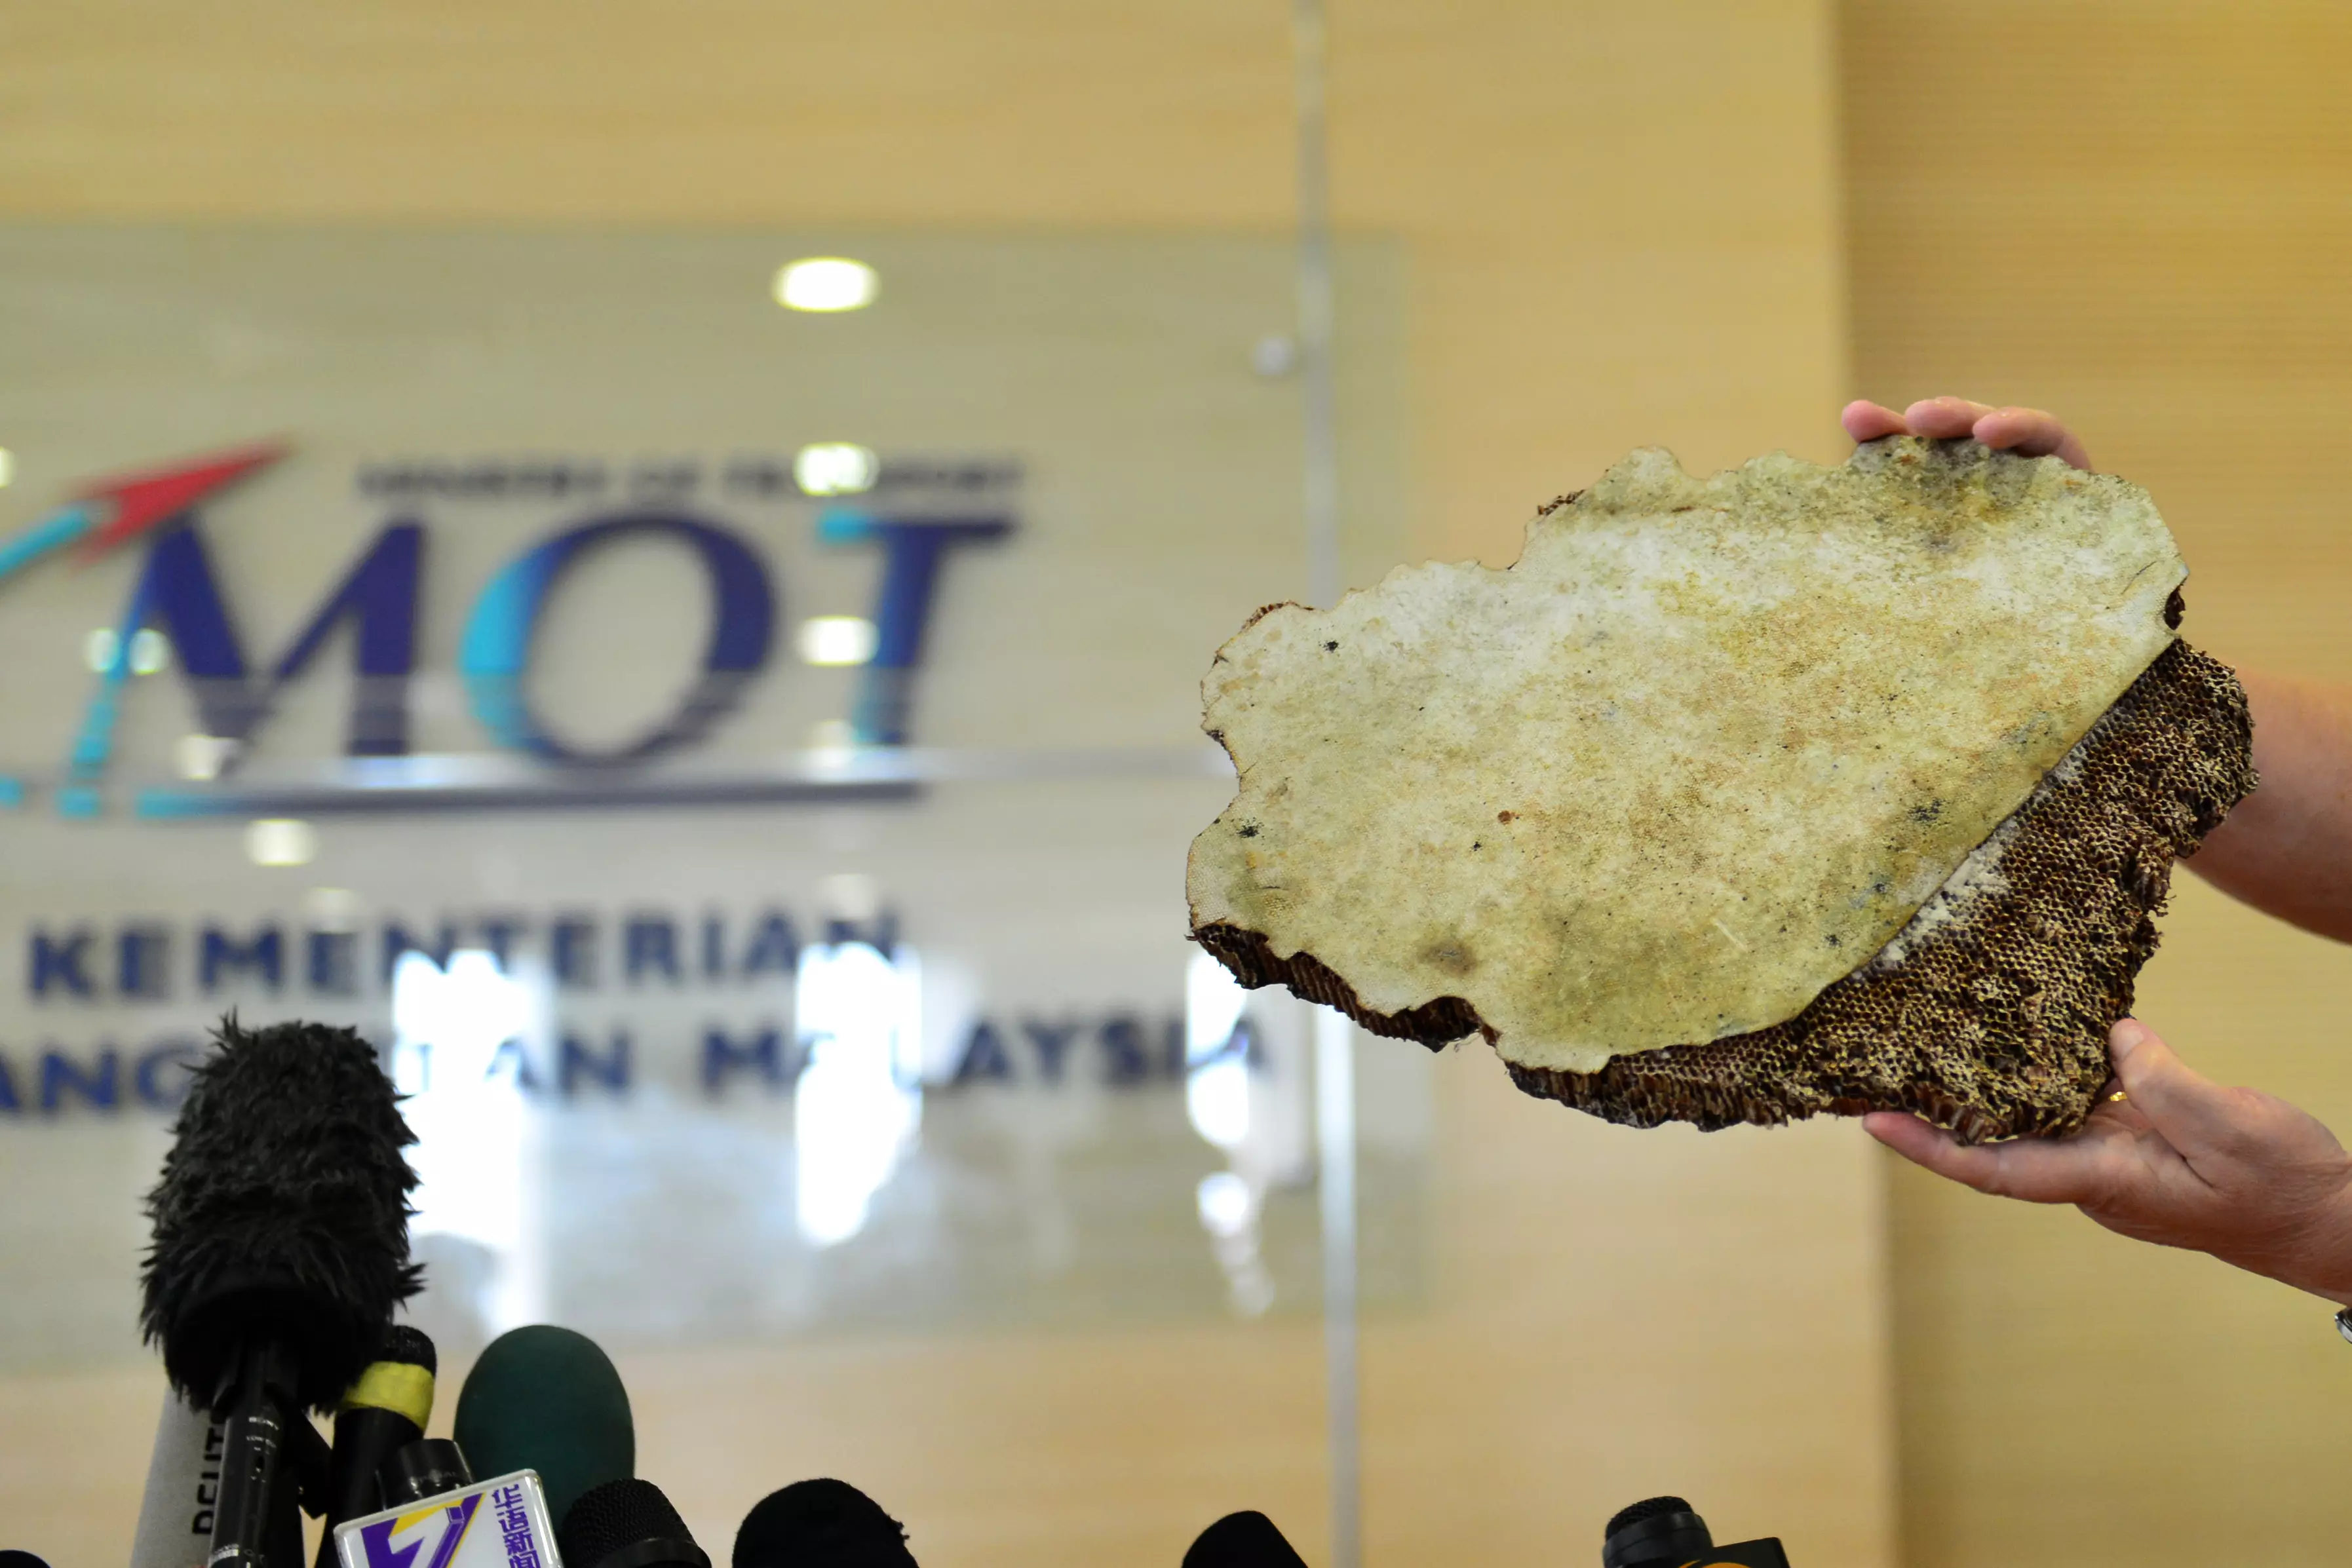 A piece of debris found in the sea thought to be from the missing plane.